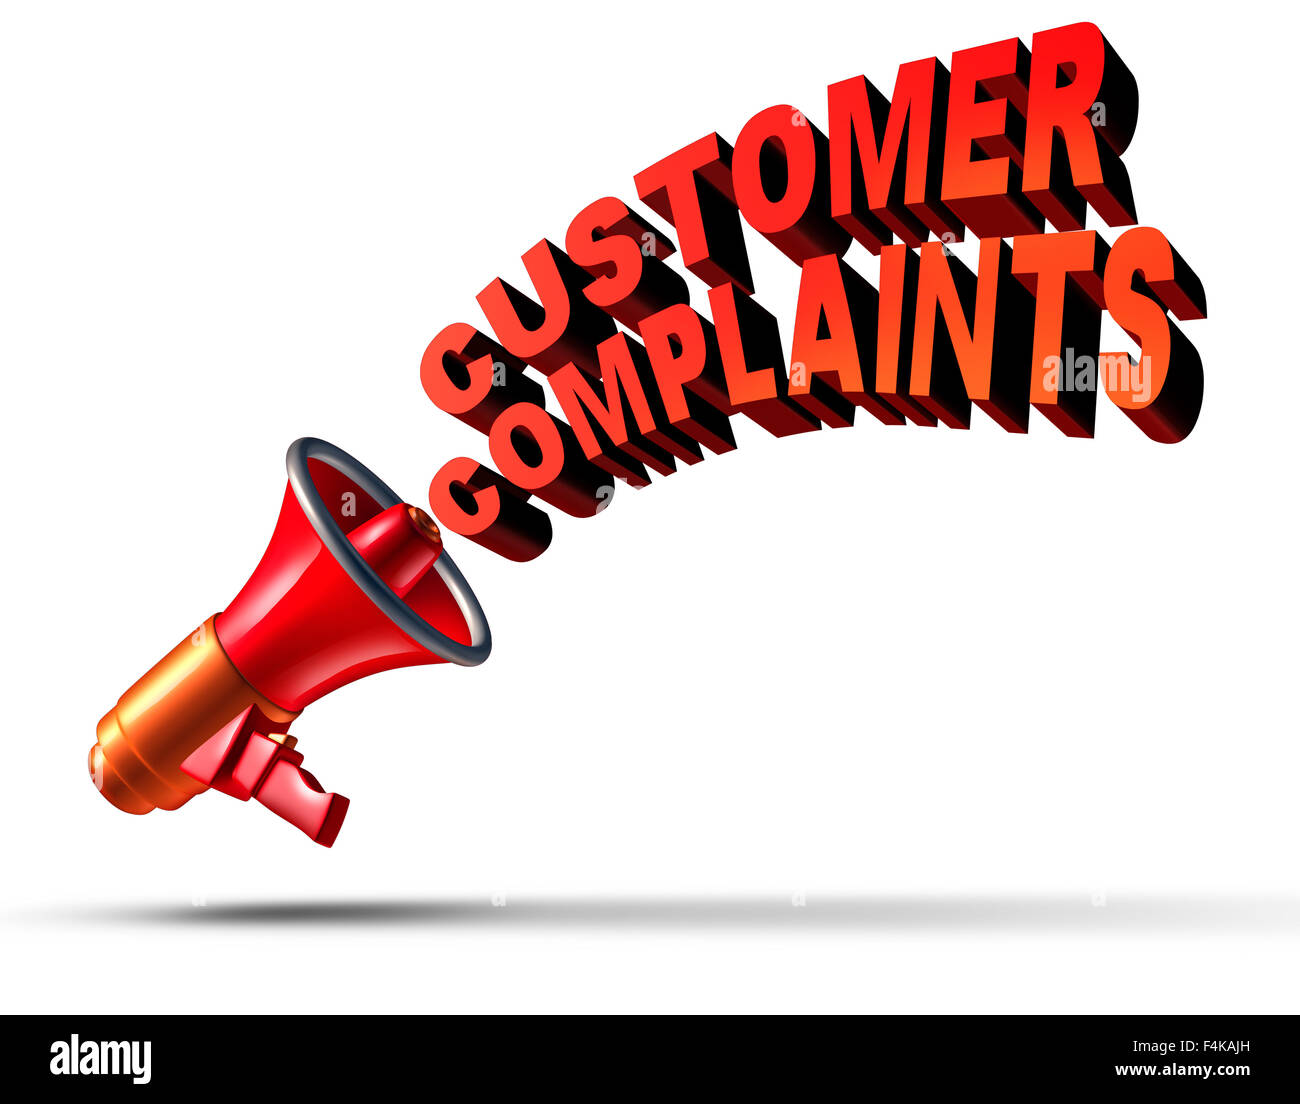 Customer complaints business symbol as a megaphone or bullhorn announcing and communicating a complaint opinion of dissatisfaction for bad client services or poor quality service as text on a white background. Stock Photo